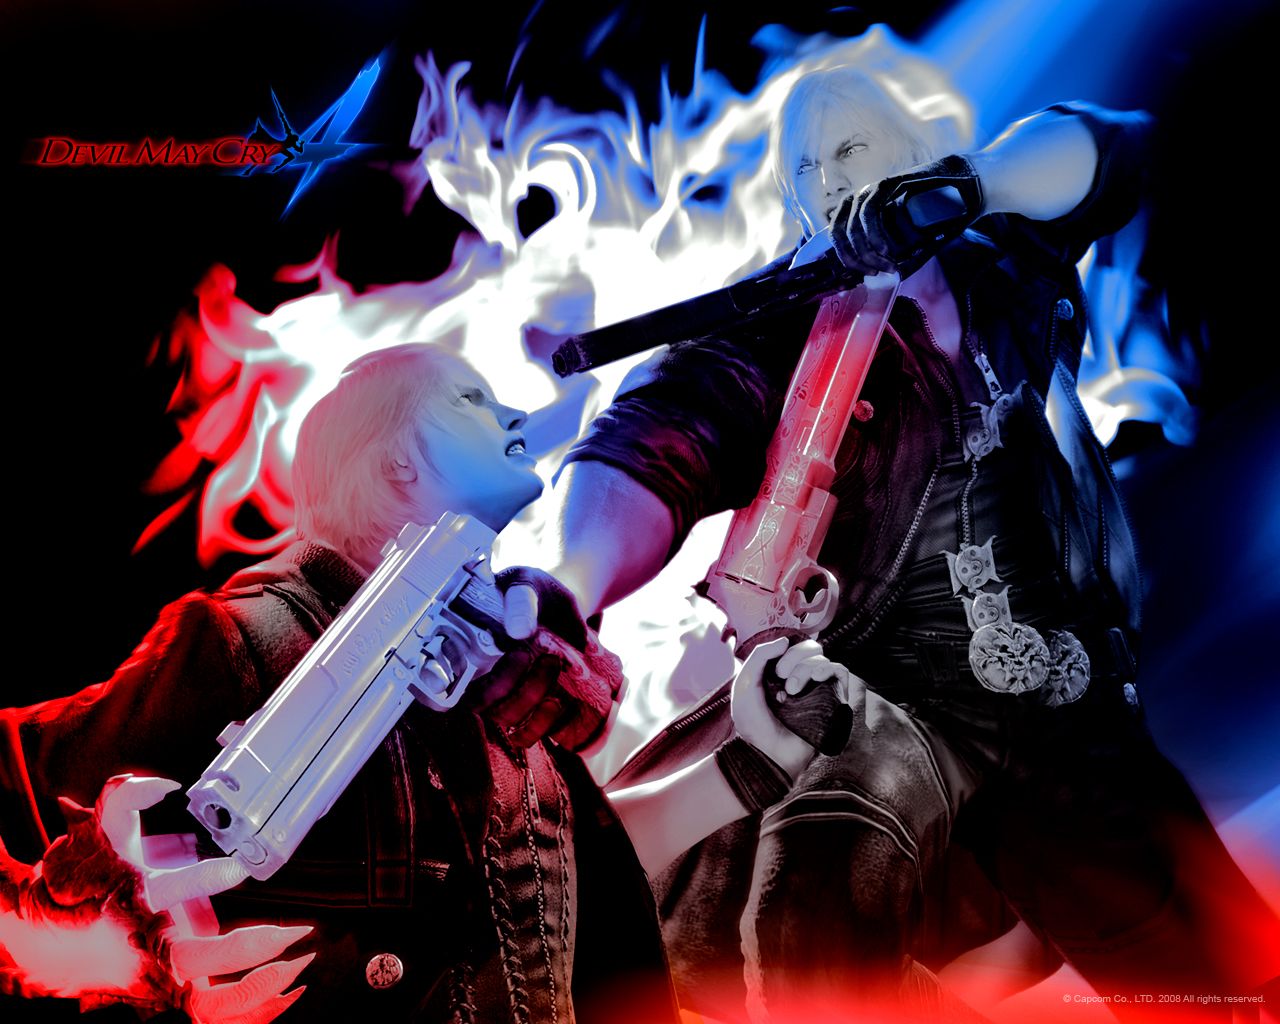 Devil may cry 4 by money666mo on DeviantArt